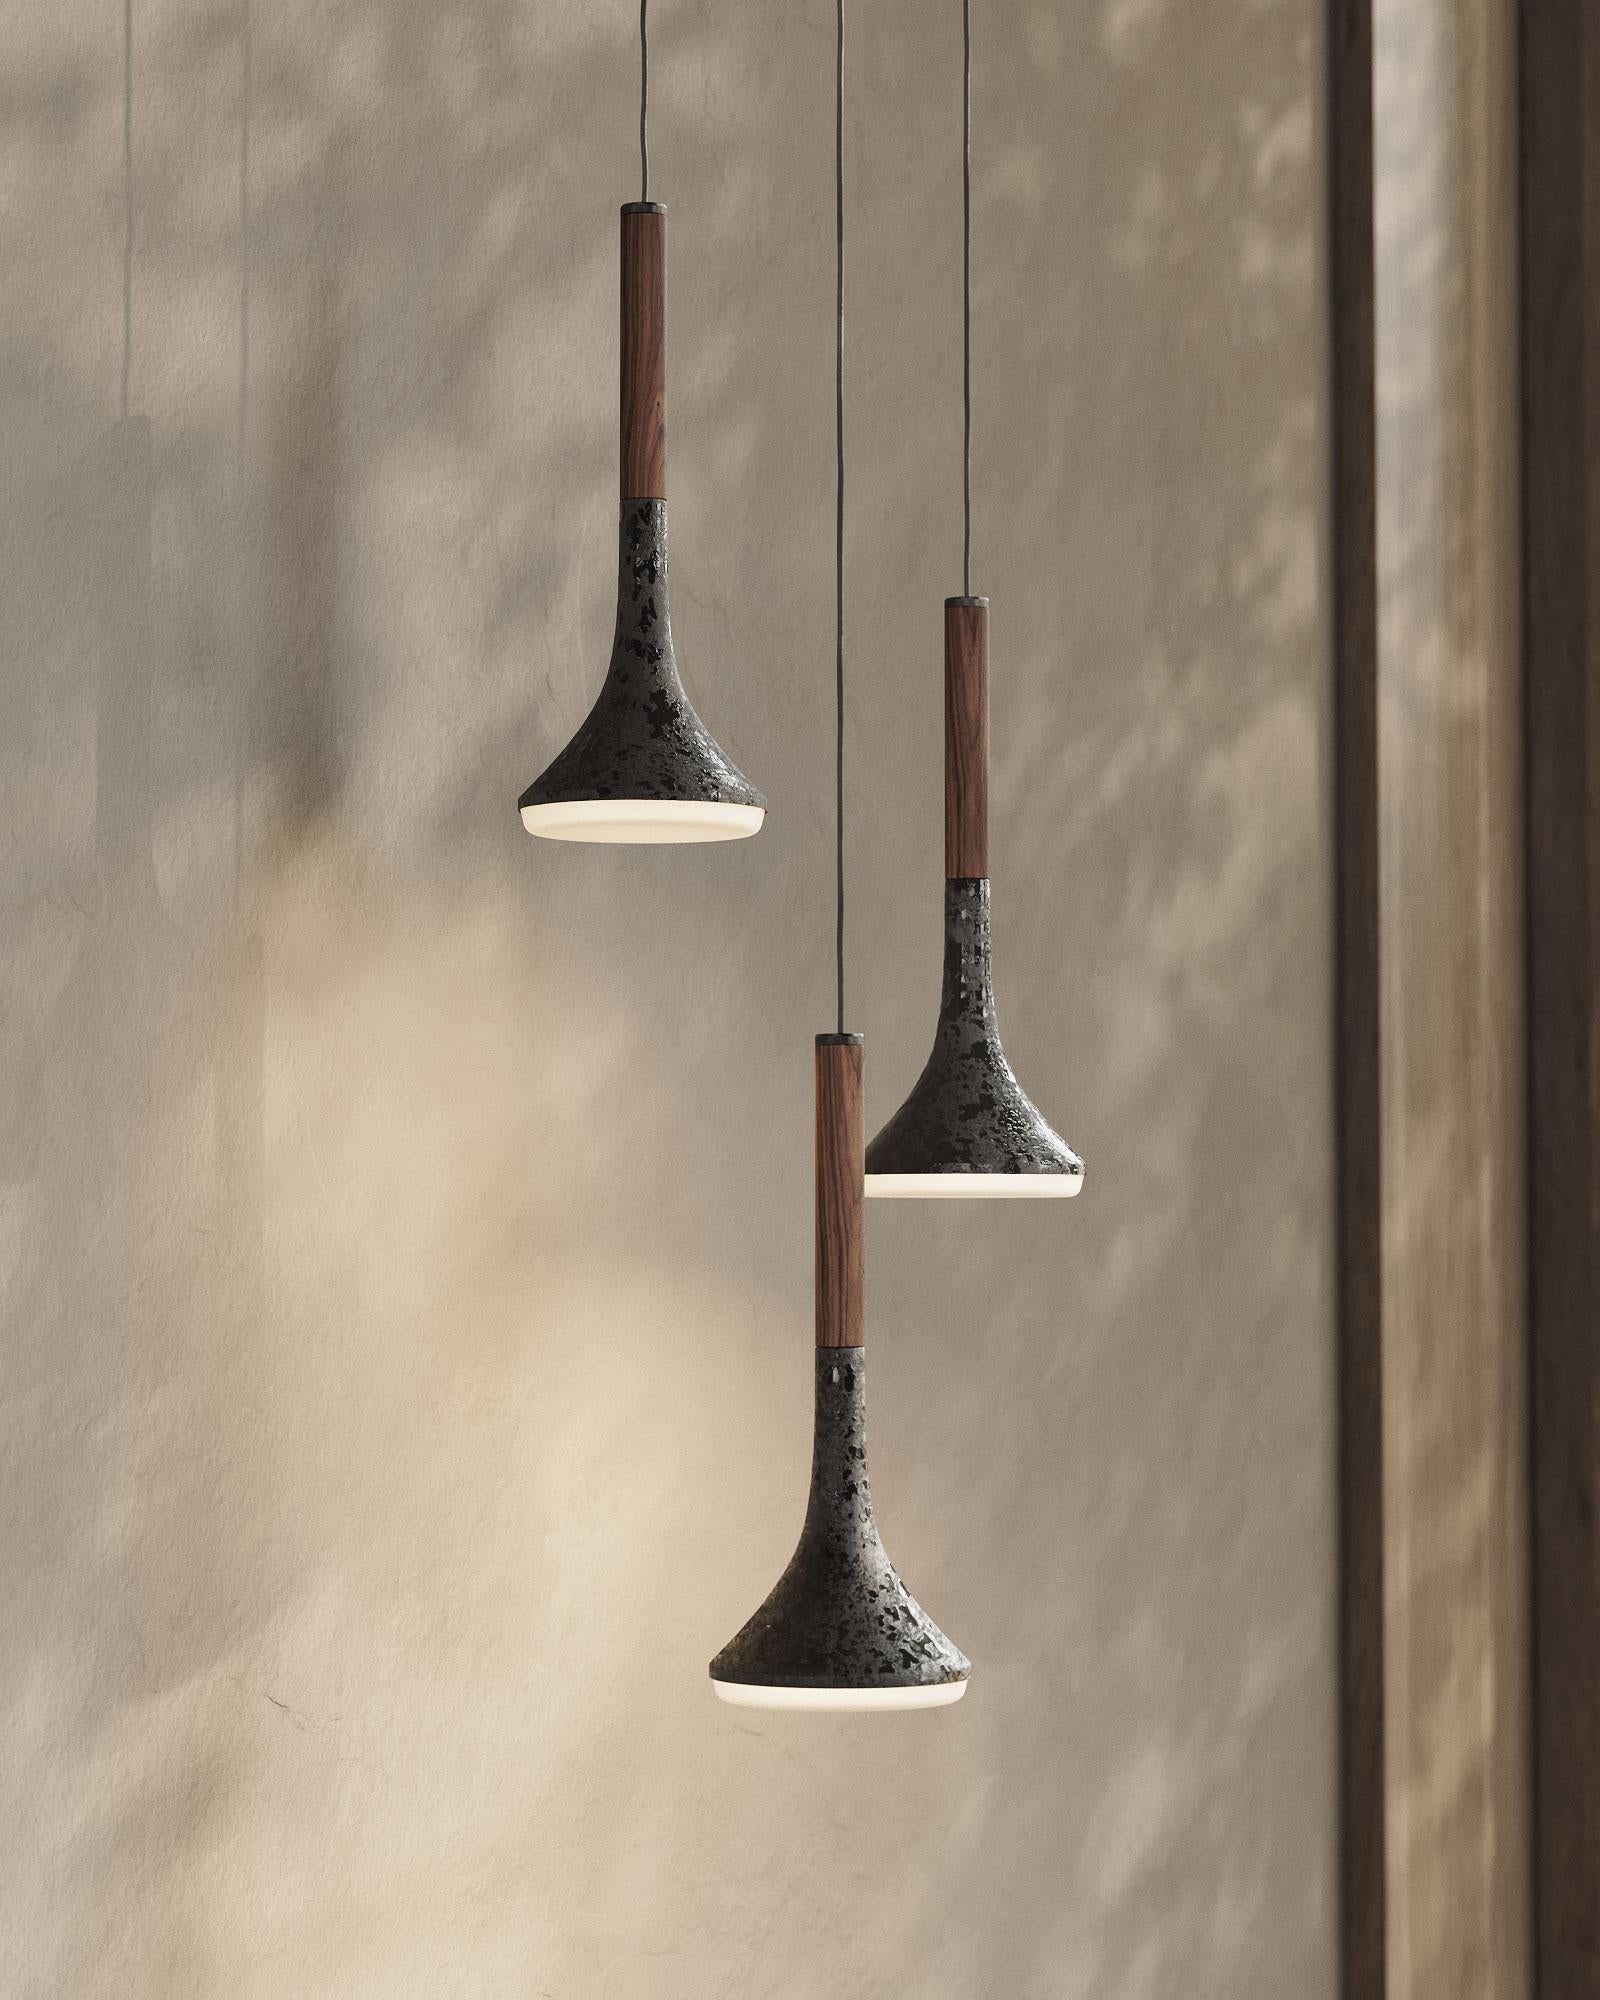 AURA is the result of experimenting with porcelain enamel on raw steel, today known as Pewter. The imperfect application of the vitreous enamel on the conical shape of this lamp makes each piece unique.

Iluminant: Incl. 5 W G9 LED 275 lm, 120 V ~